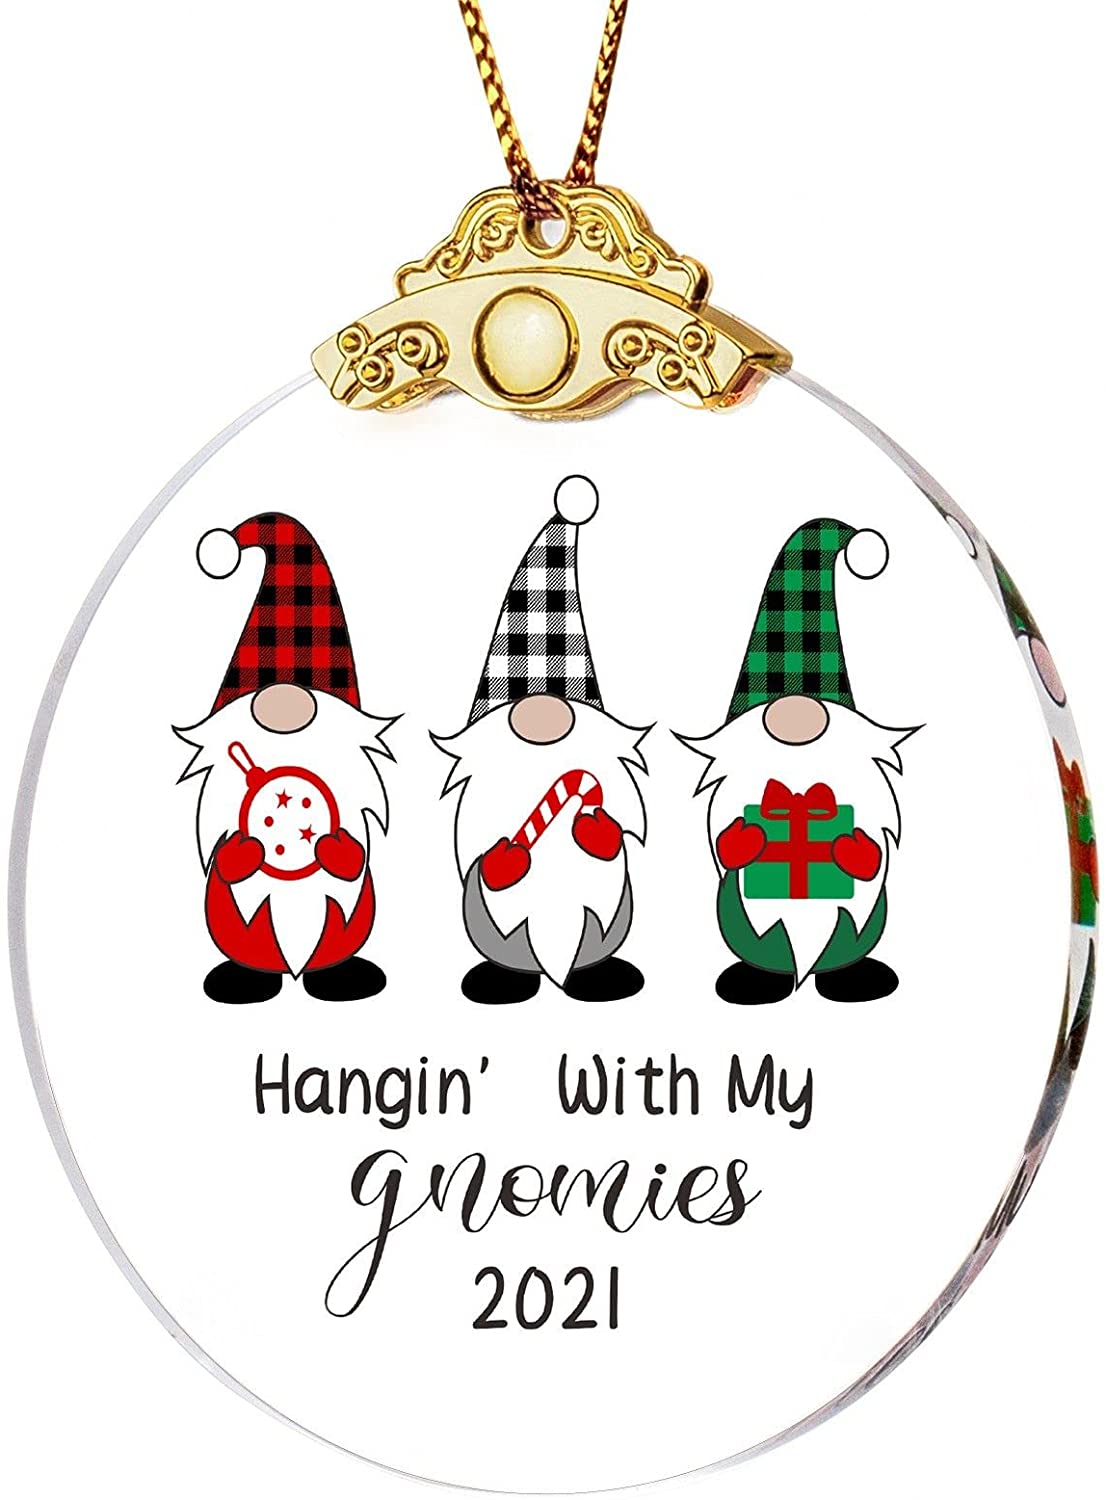 First Christmas in Our New Home Christmas Ornaments Crystal Ceremony Decorations SDHSGSB First Home Ornaments 2021 Holiday Keepsake Hanging Gifts for Christmas Tree